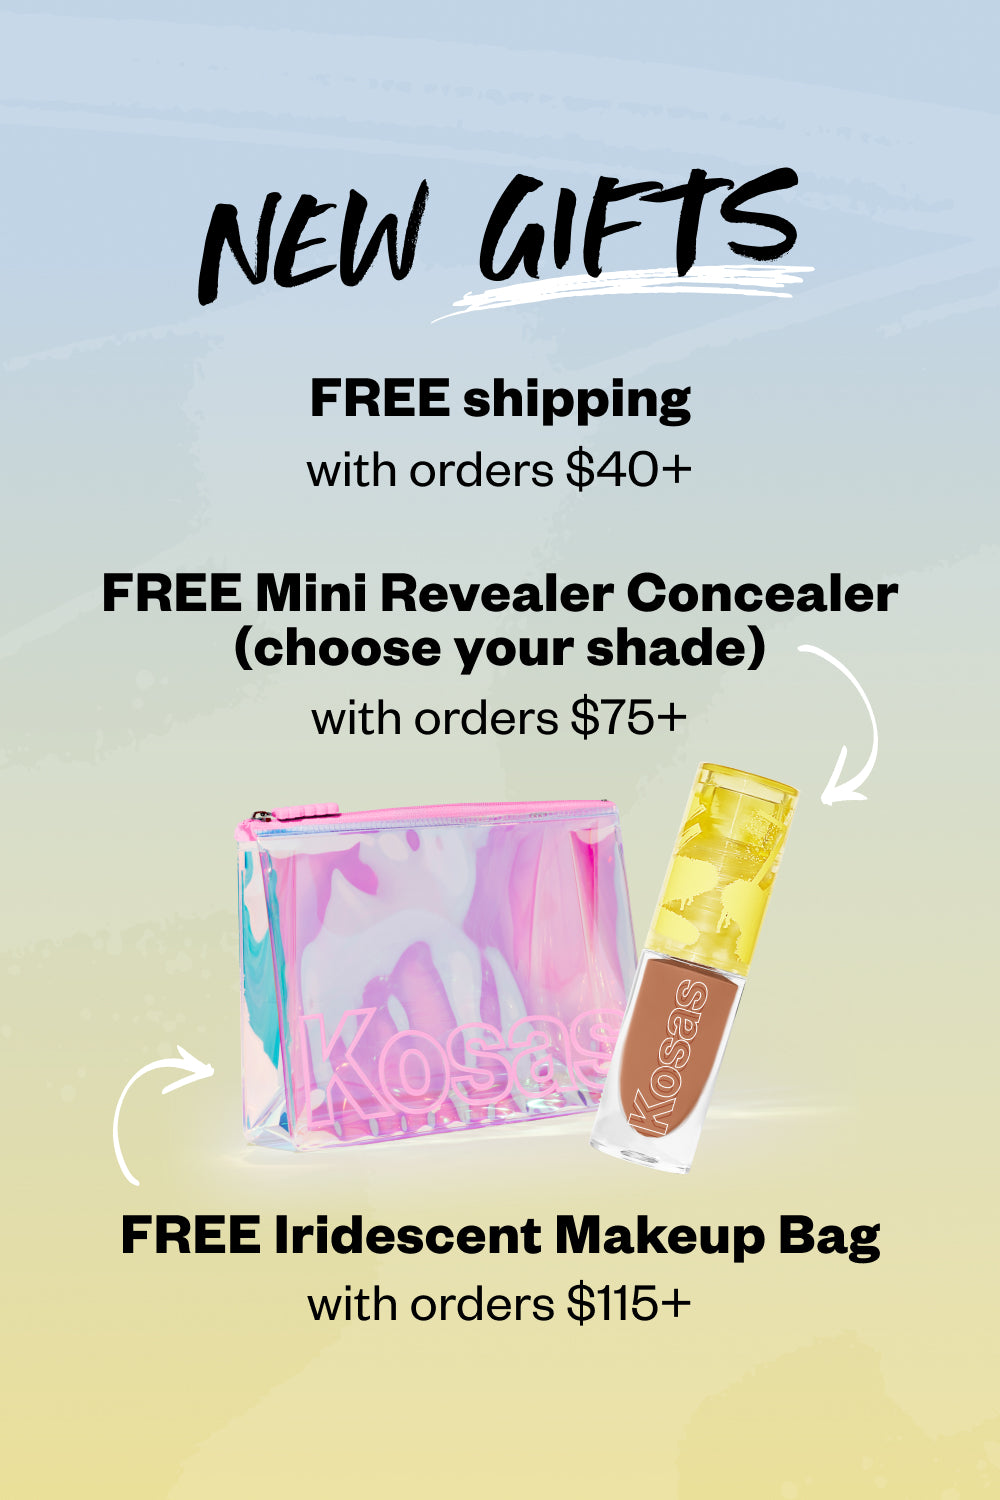 NEW GIFTS! Free Mini revealer concealer for orders $75+ and Free Iridescent Make up bag with orders $115+